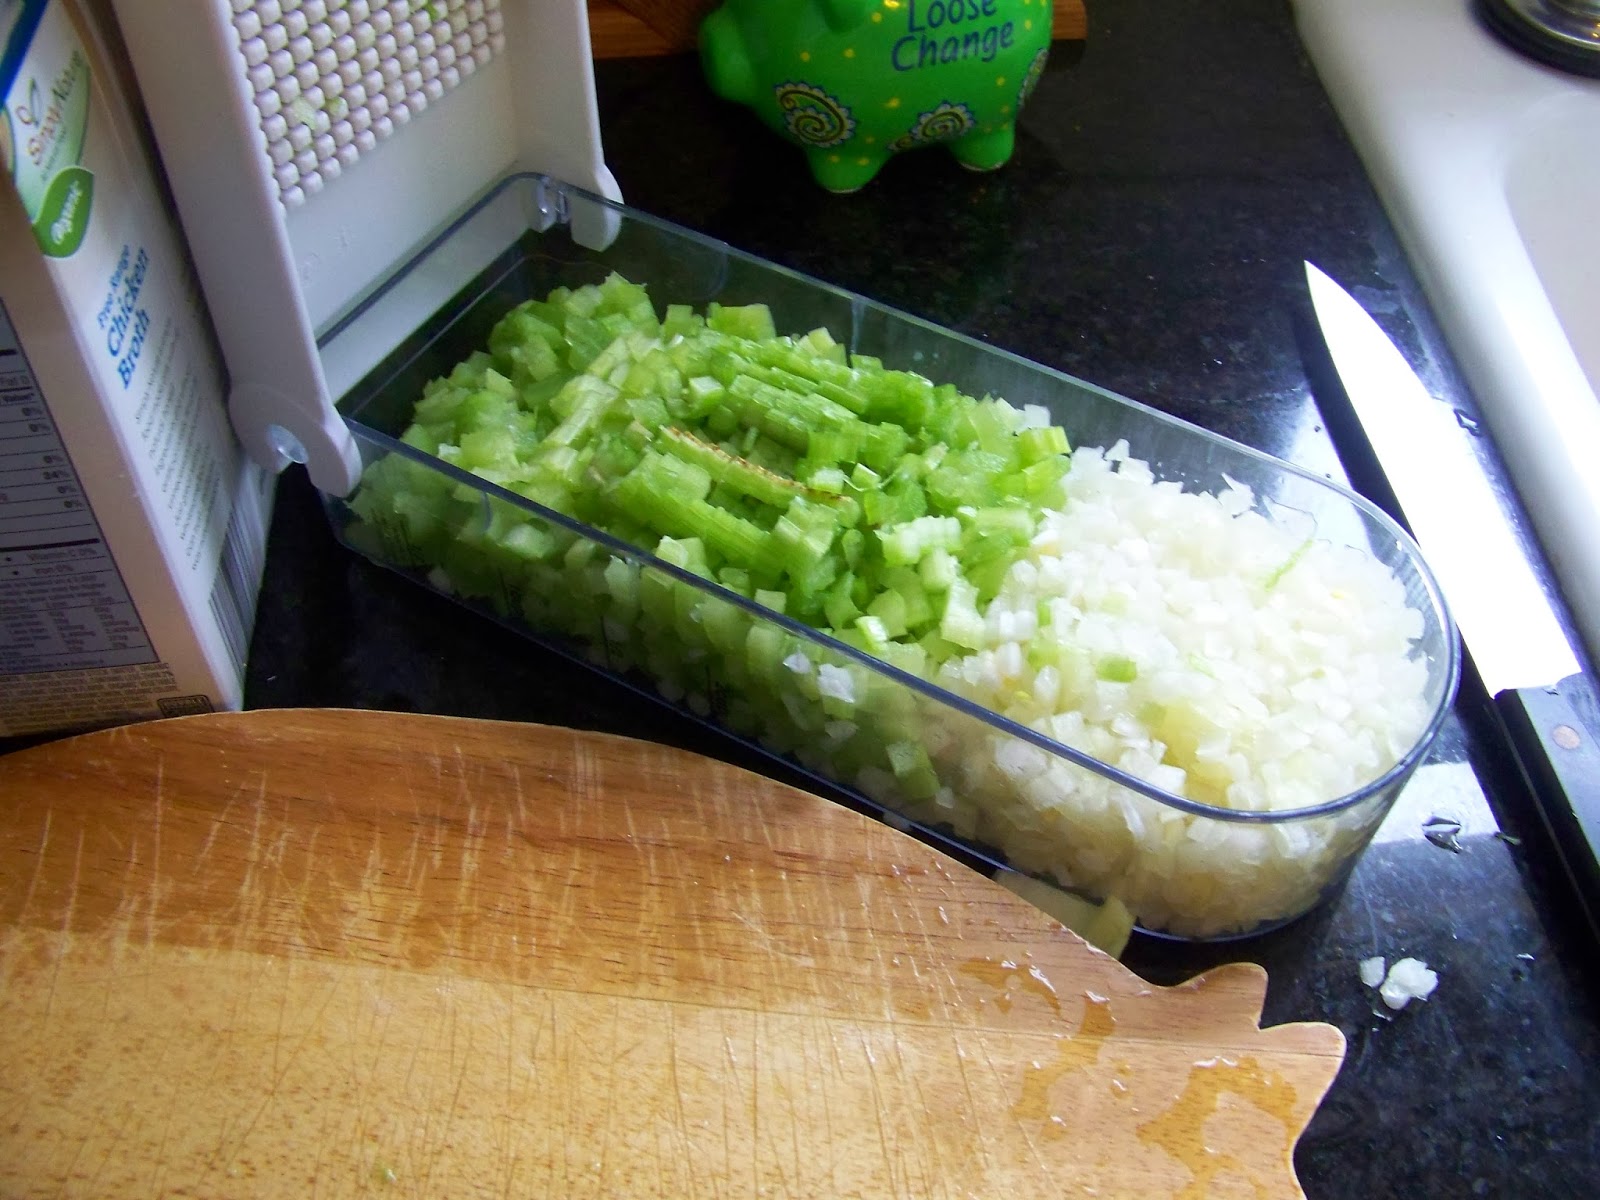 the chopped celery and onion